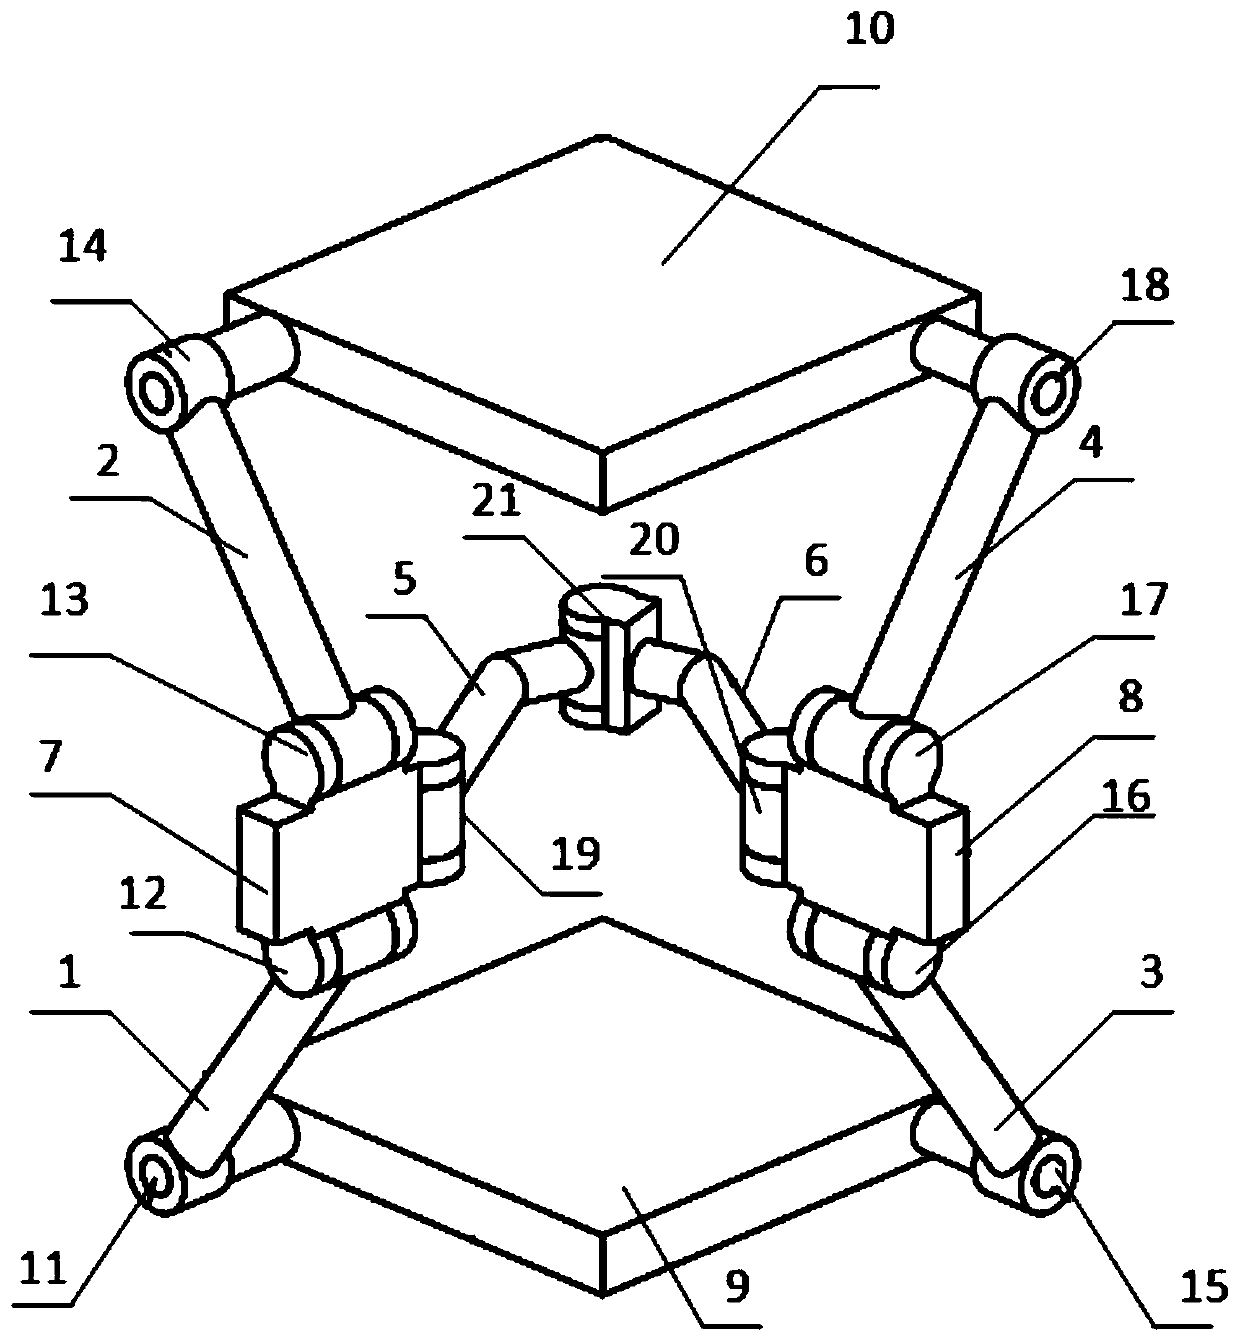 Linkage mechanism capable of achieving precise vertical rectilinear motion